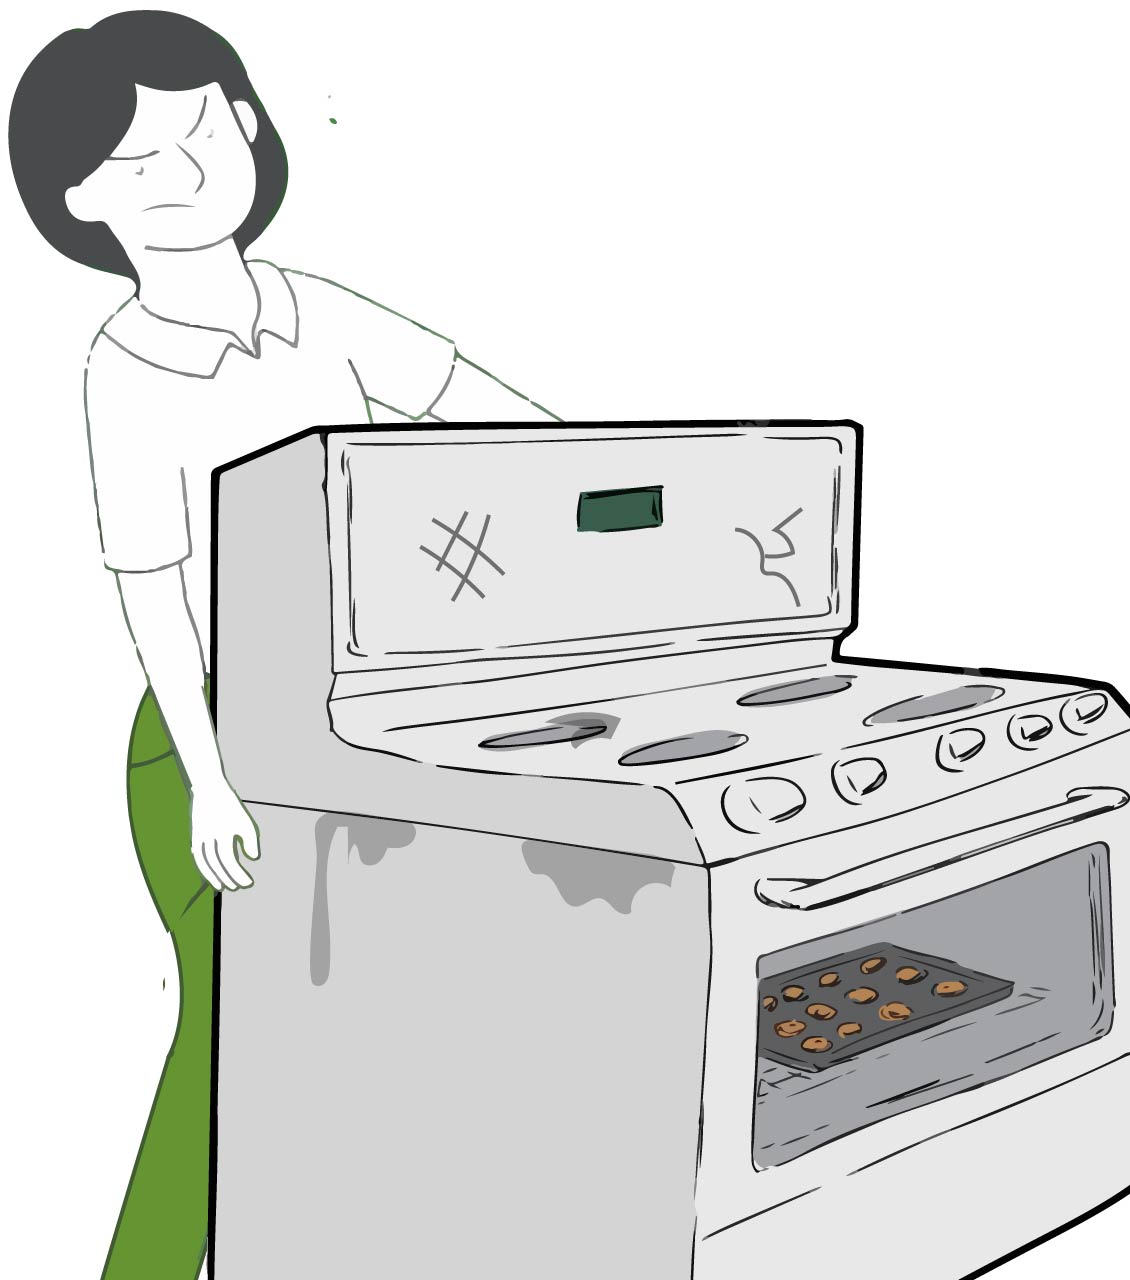 Chicago oven removal services